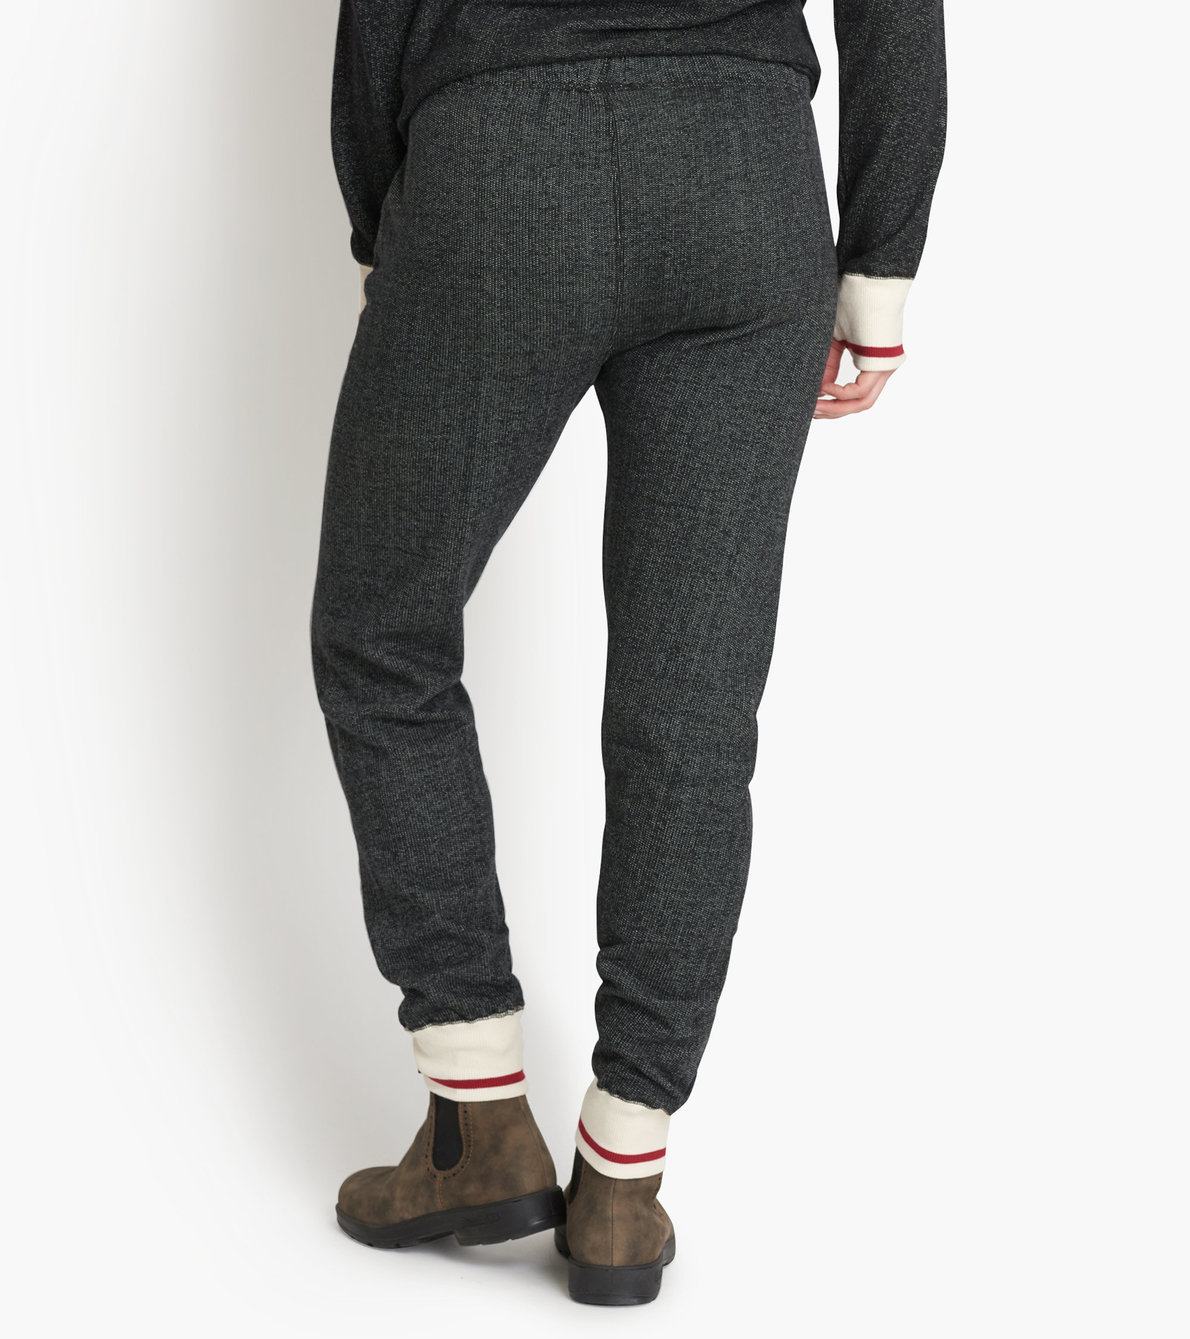 View larger image of Charcoal Bear Women's Heritage Joggers